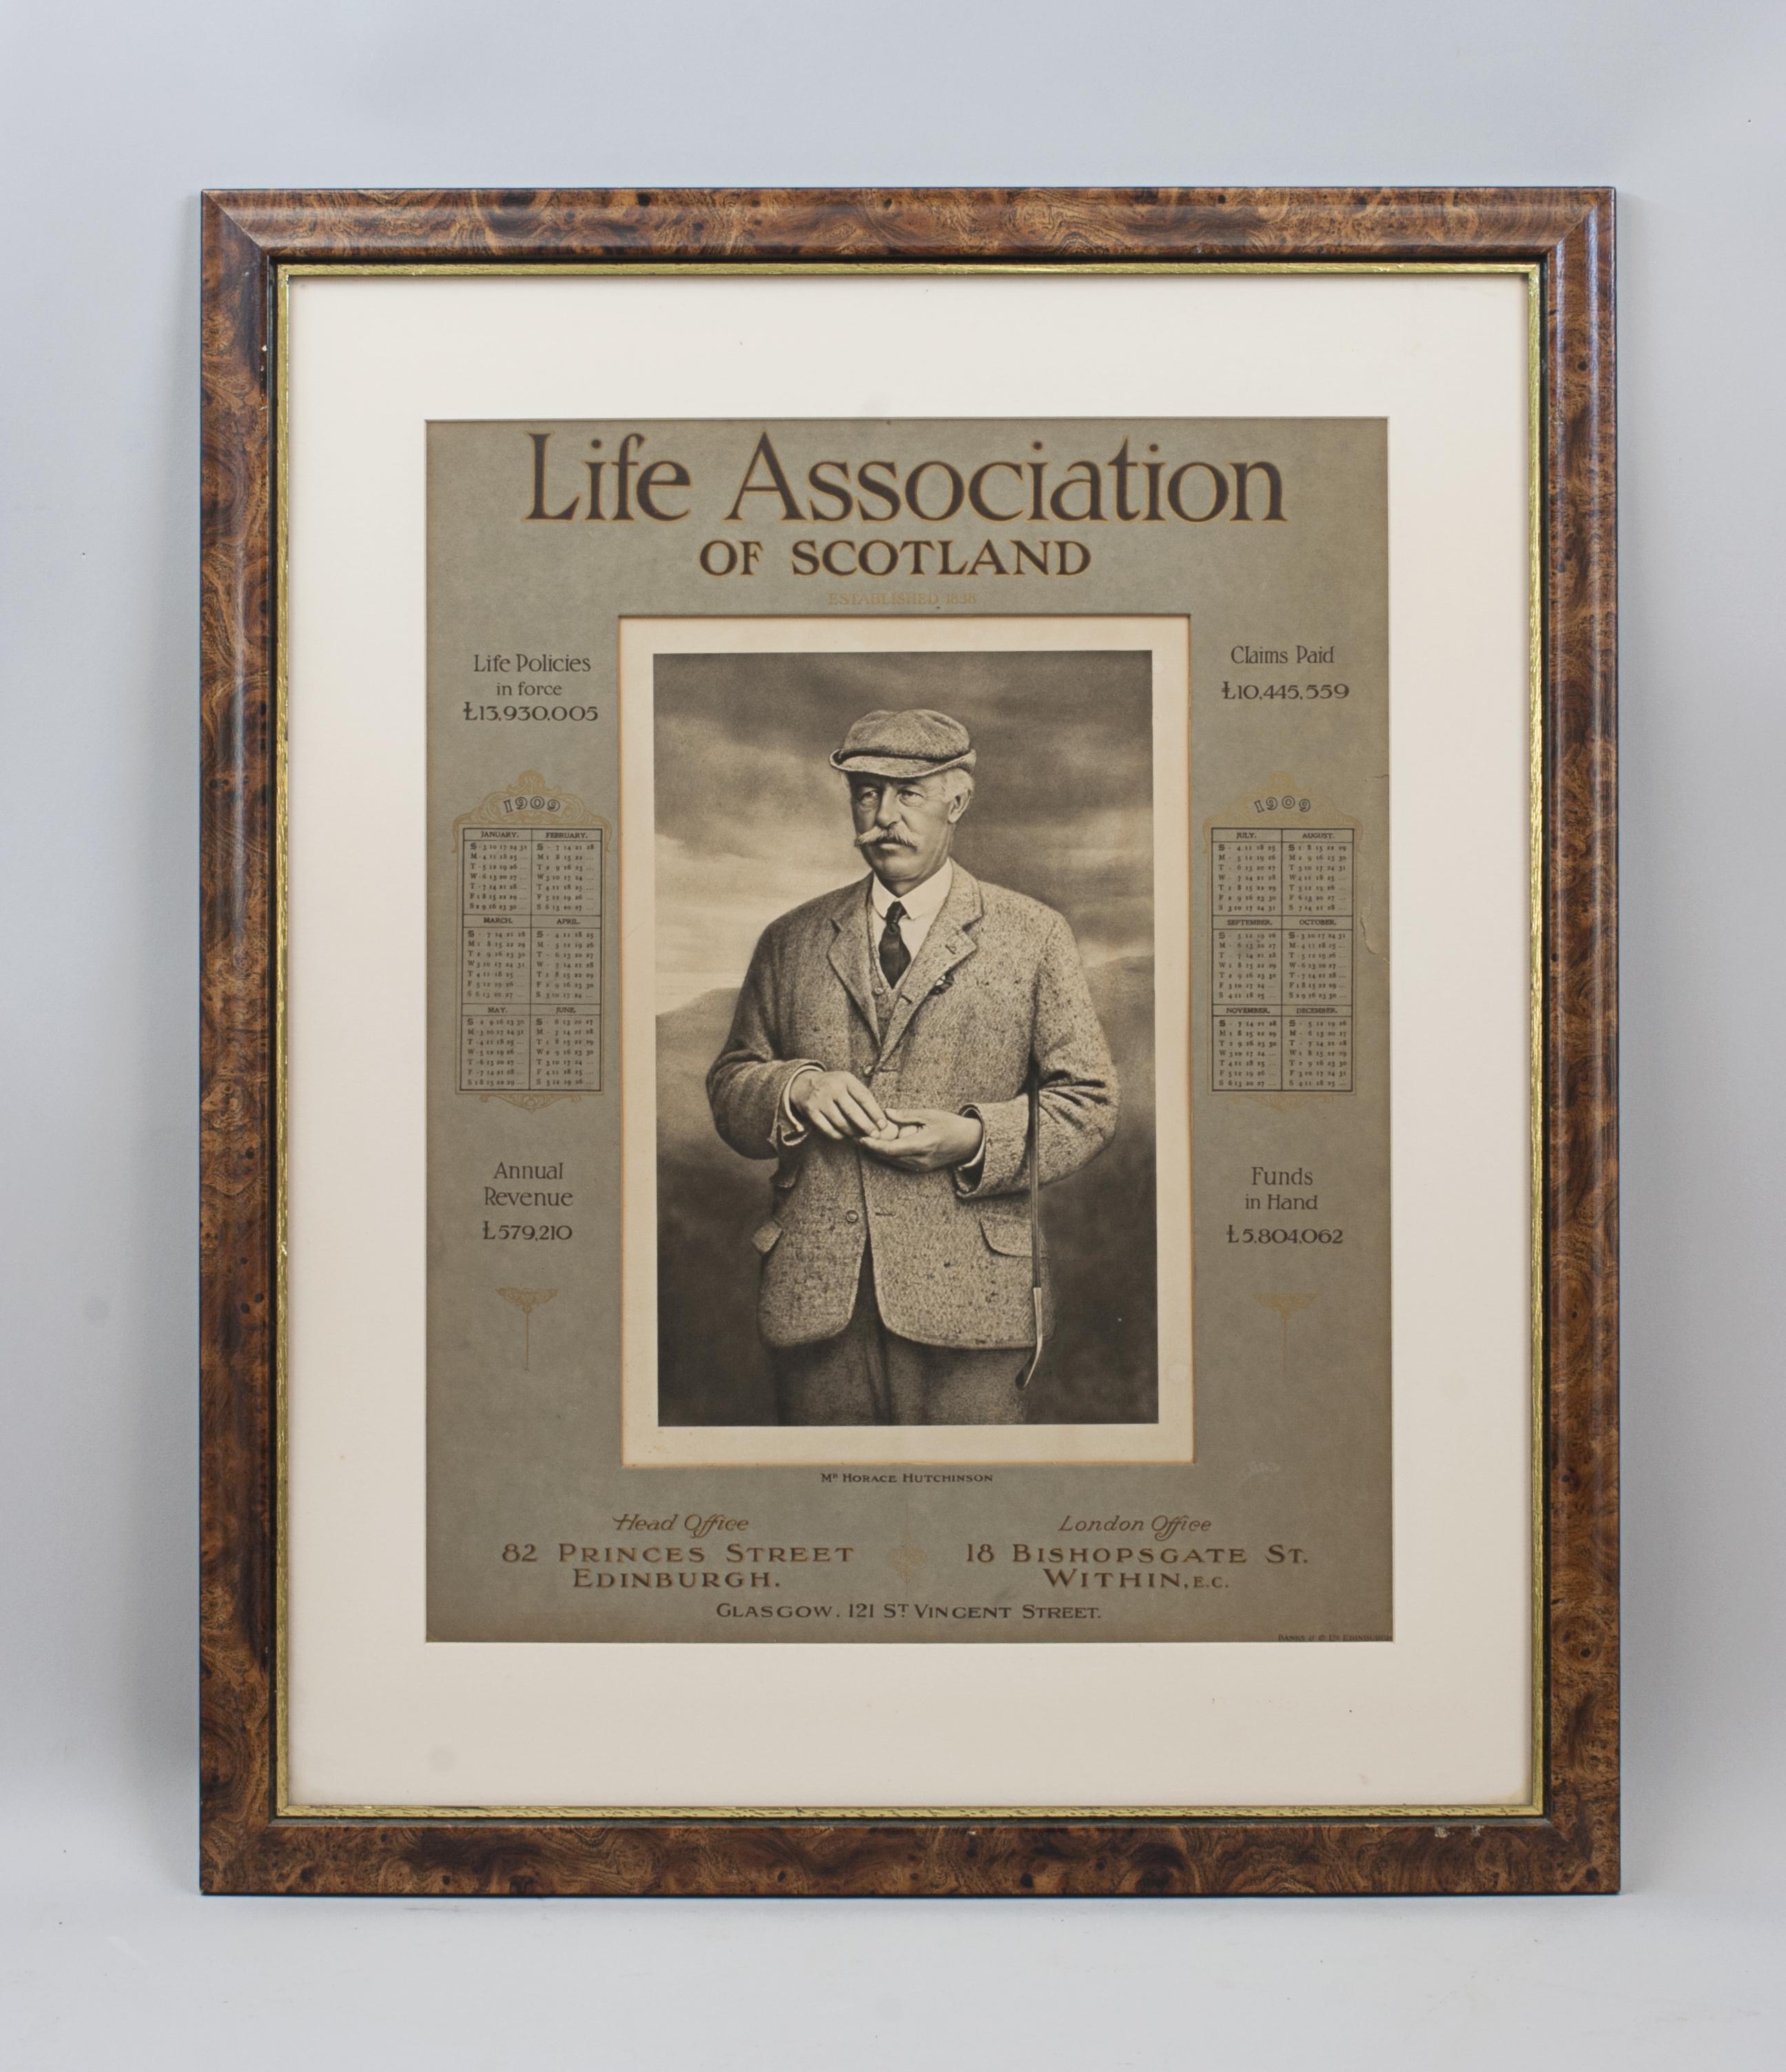 Antique Life Association Golf Print, Mr Horace Hutchinson.
An original Life Association of Scotland 1909 calendar. The calendar has been framed and is with a wonderful central golfing picture of English amateur golfer, Mr Horace Hutchinson, taken